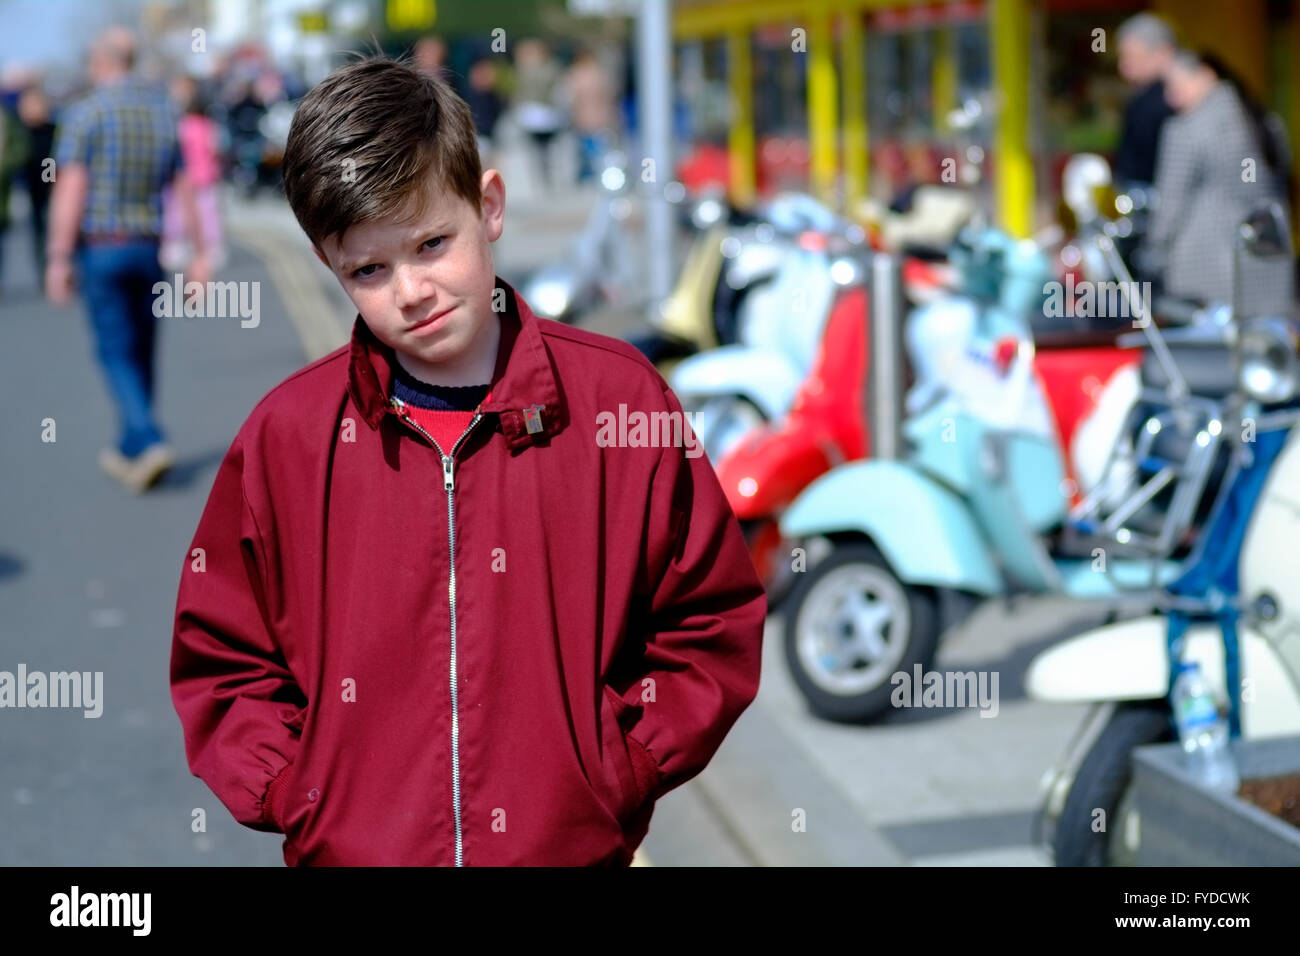 Young Mod looking cool Stock Photo